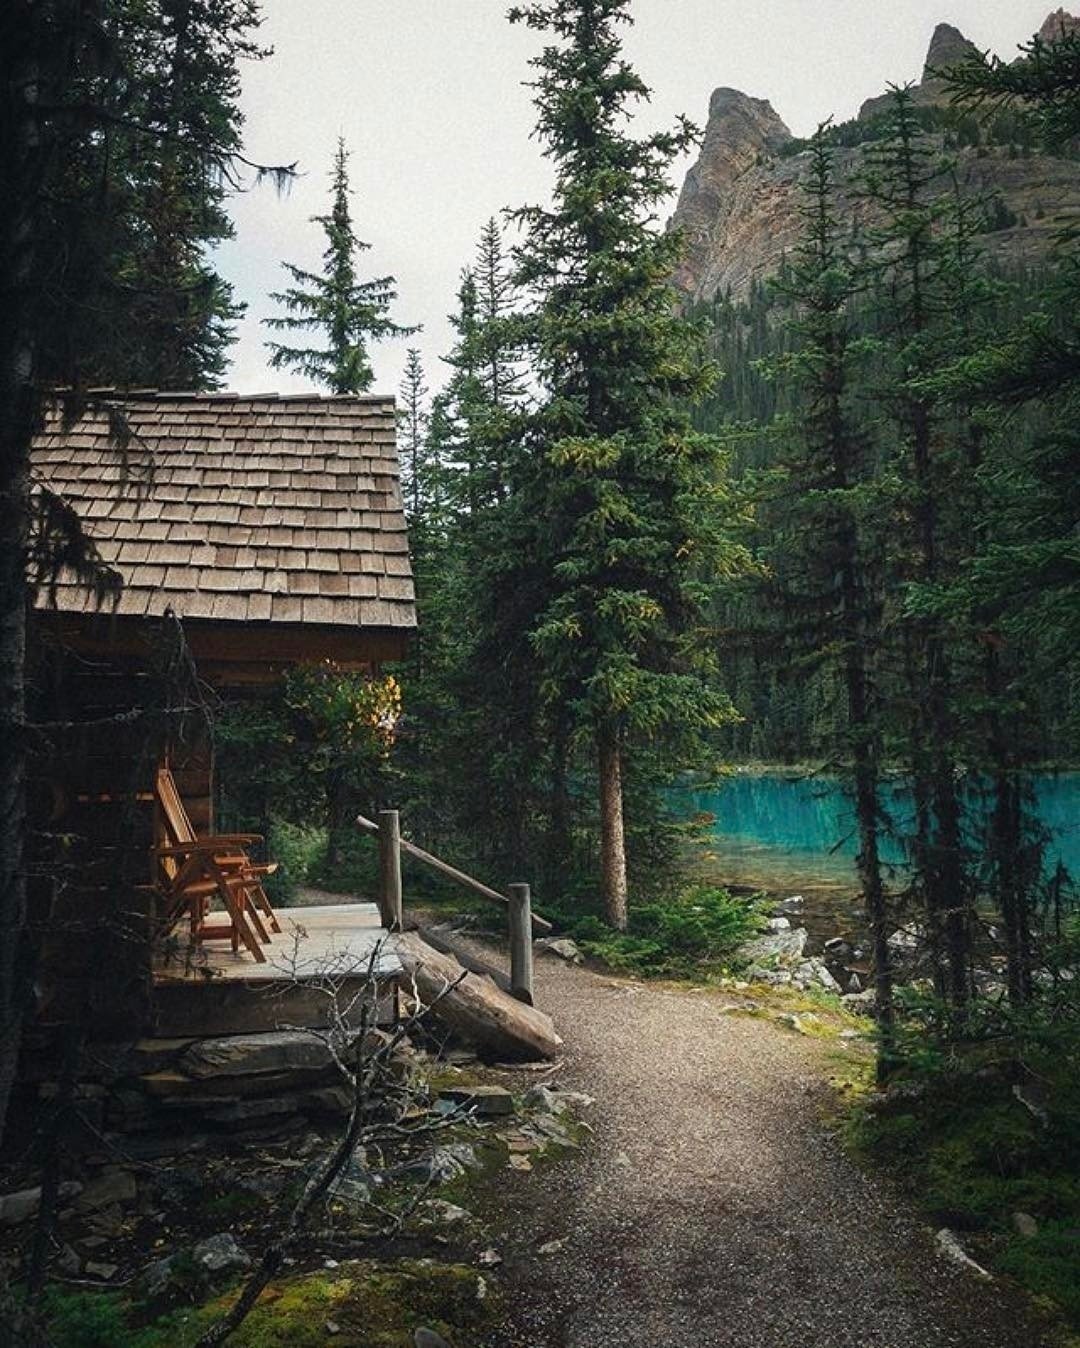 Photo by pdS with the username @pdS,  July 12, 2018 at 4:27 AM and the text says 'pieceofwilderness:

Views for days!  Tag a friend you’d take here!  By @jamieout
.
Follow our friends @cabinsdaily
.
#travel #travelabroad #travellife #cabins #travelgram #traveler #aframe #home #interiordesign #camping #airbnb #earthfocus #nature..'